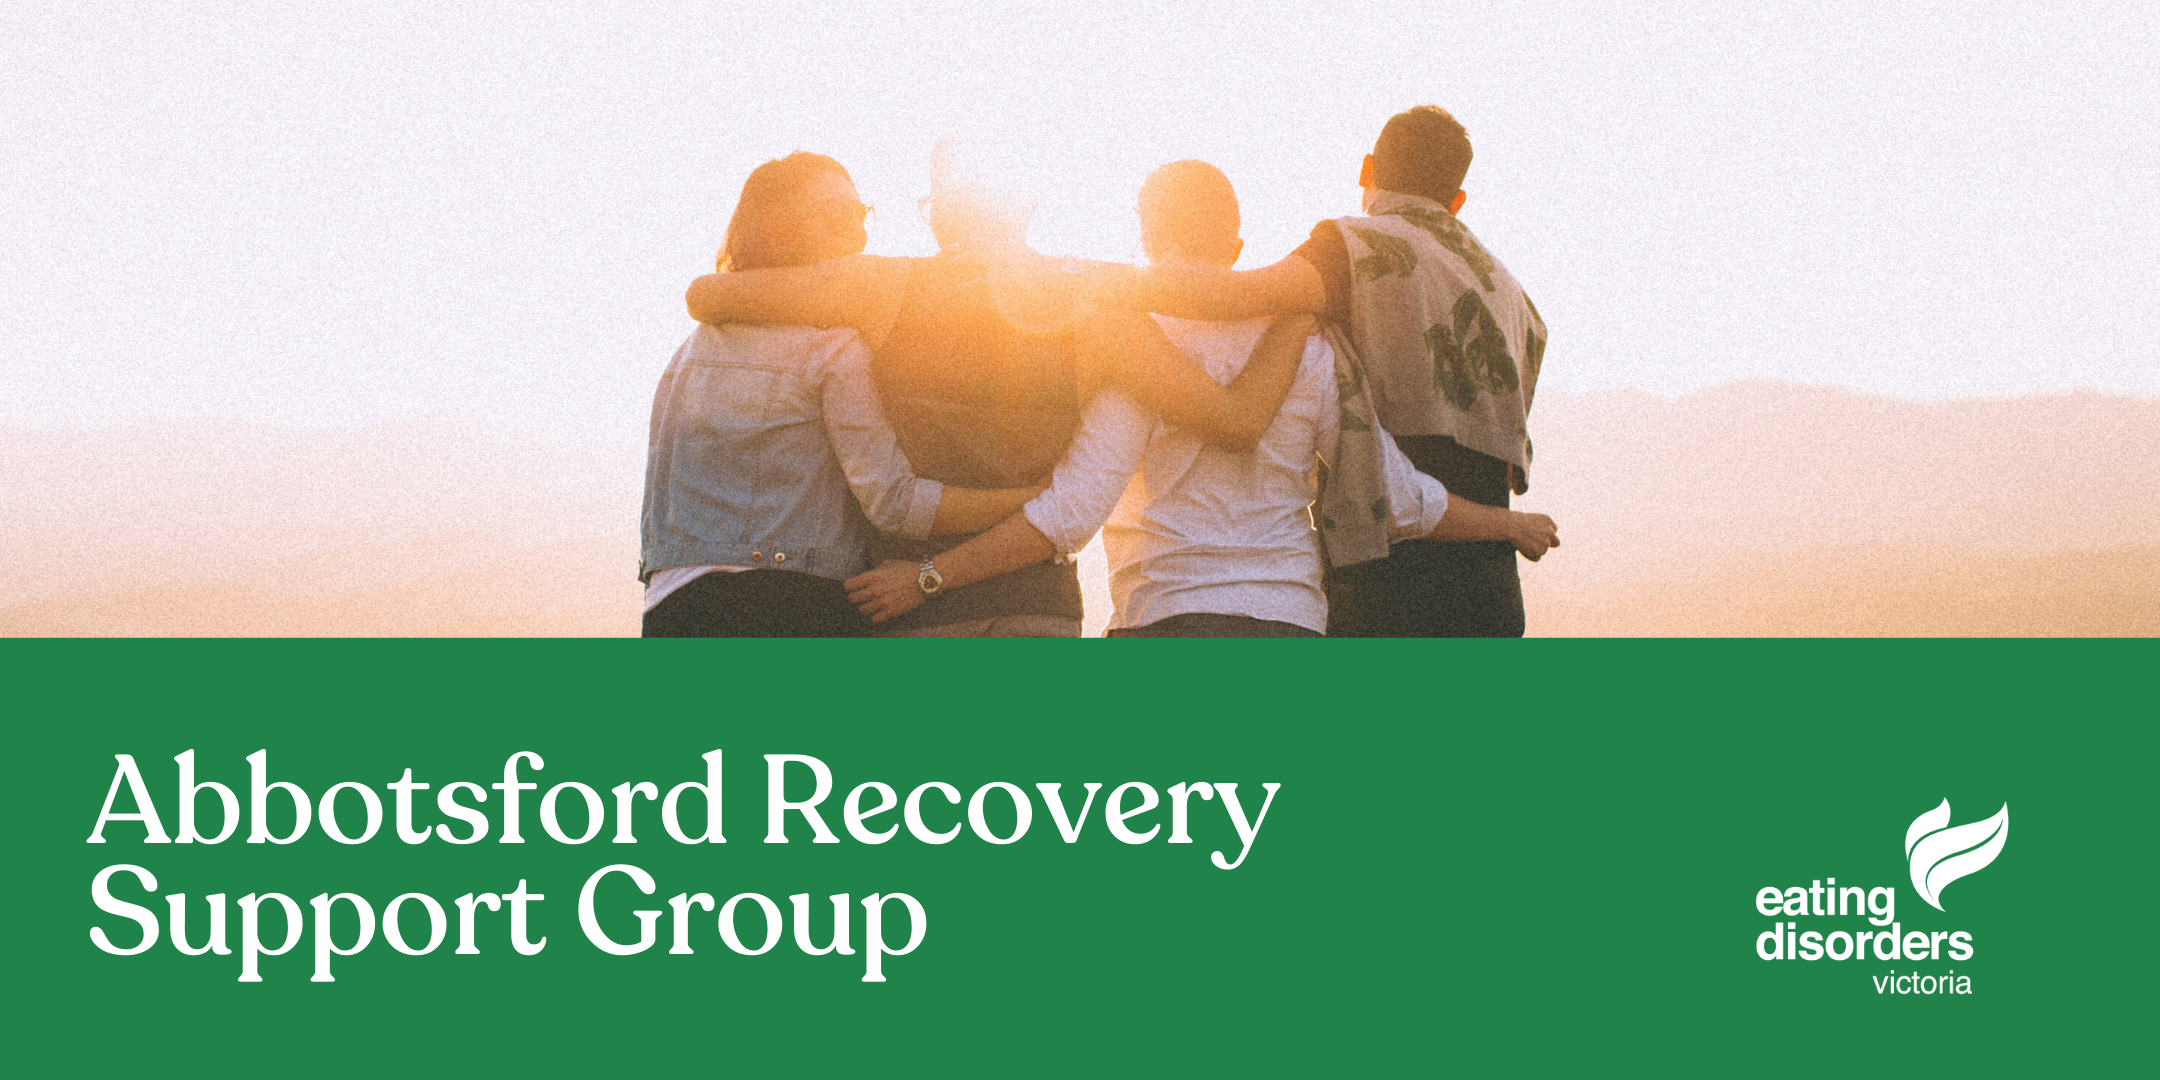 Abbotsford Recovery Support Group